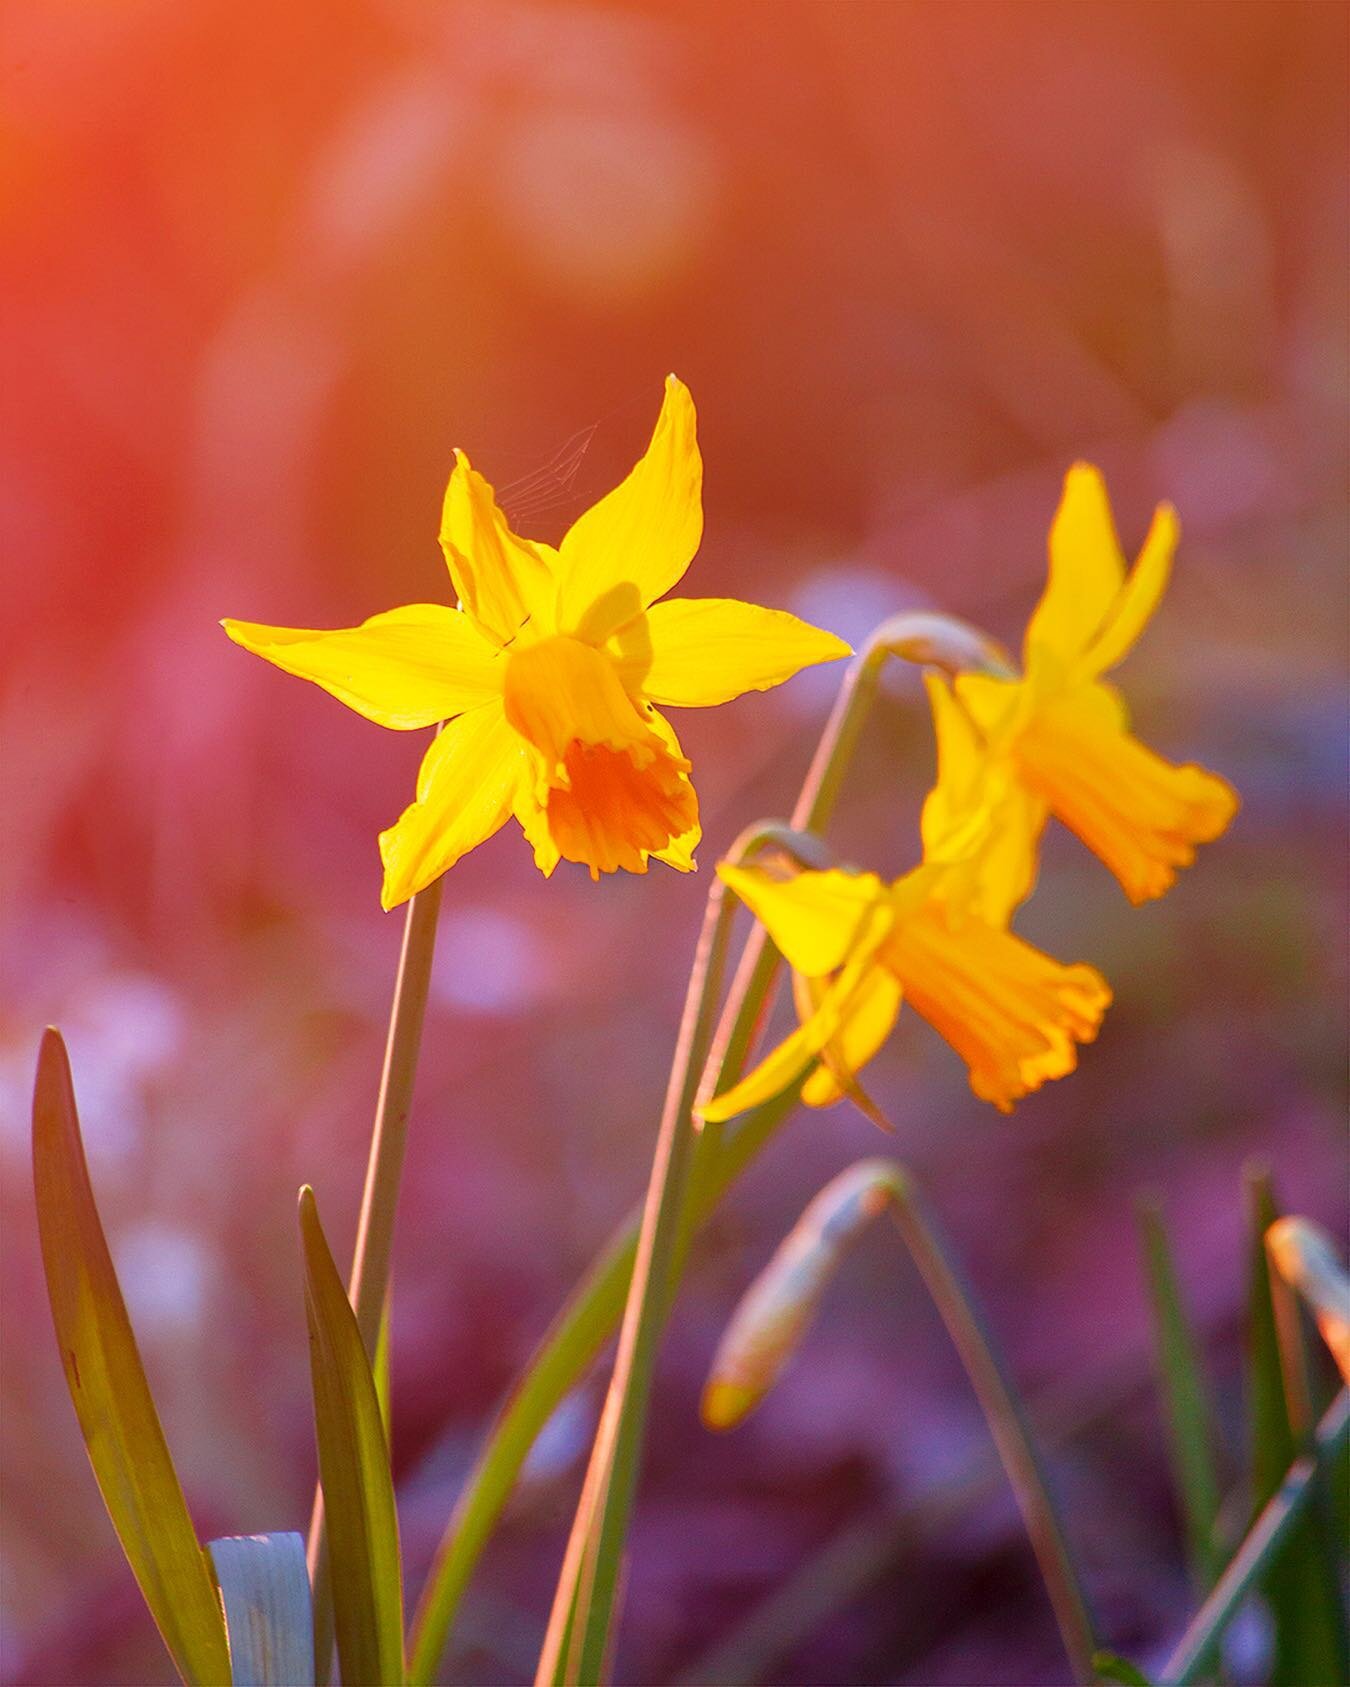 After snowdrops come #daffodils on the sunny side of winter. Yellow trumpets fill the hills with sun despite the chill.